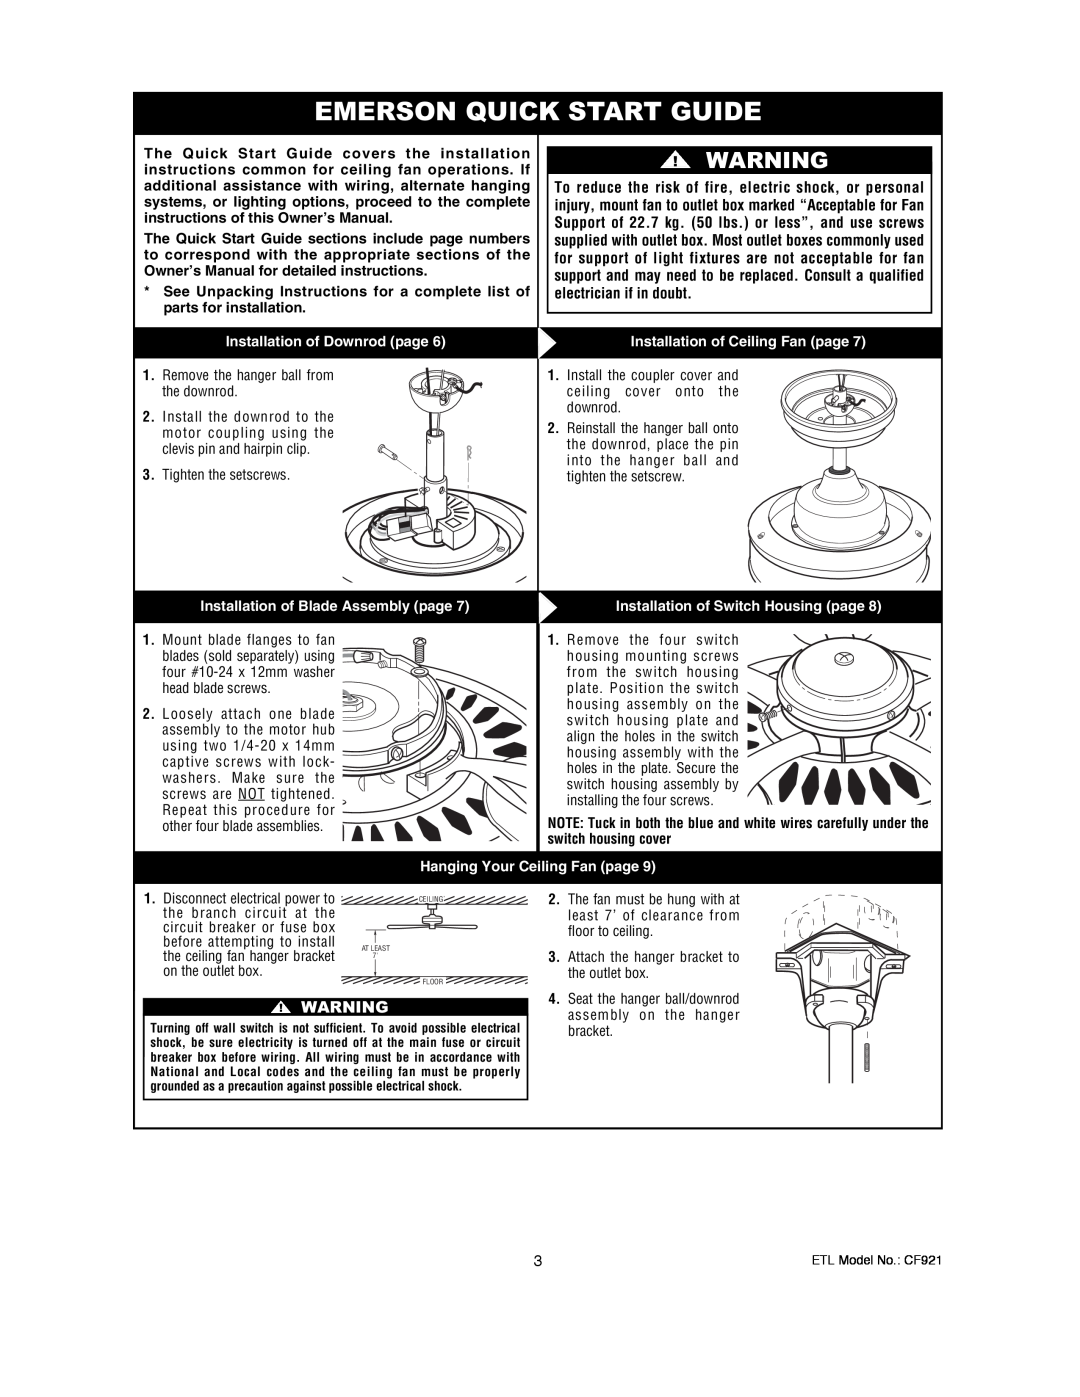 Electrolux CF921BS00, CF921ORB00 Emerson Quick Start Guide, Installation of Downrod page, Installation of Ceiling Fan page 